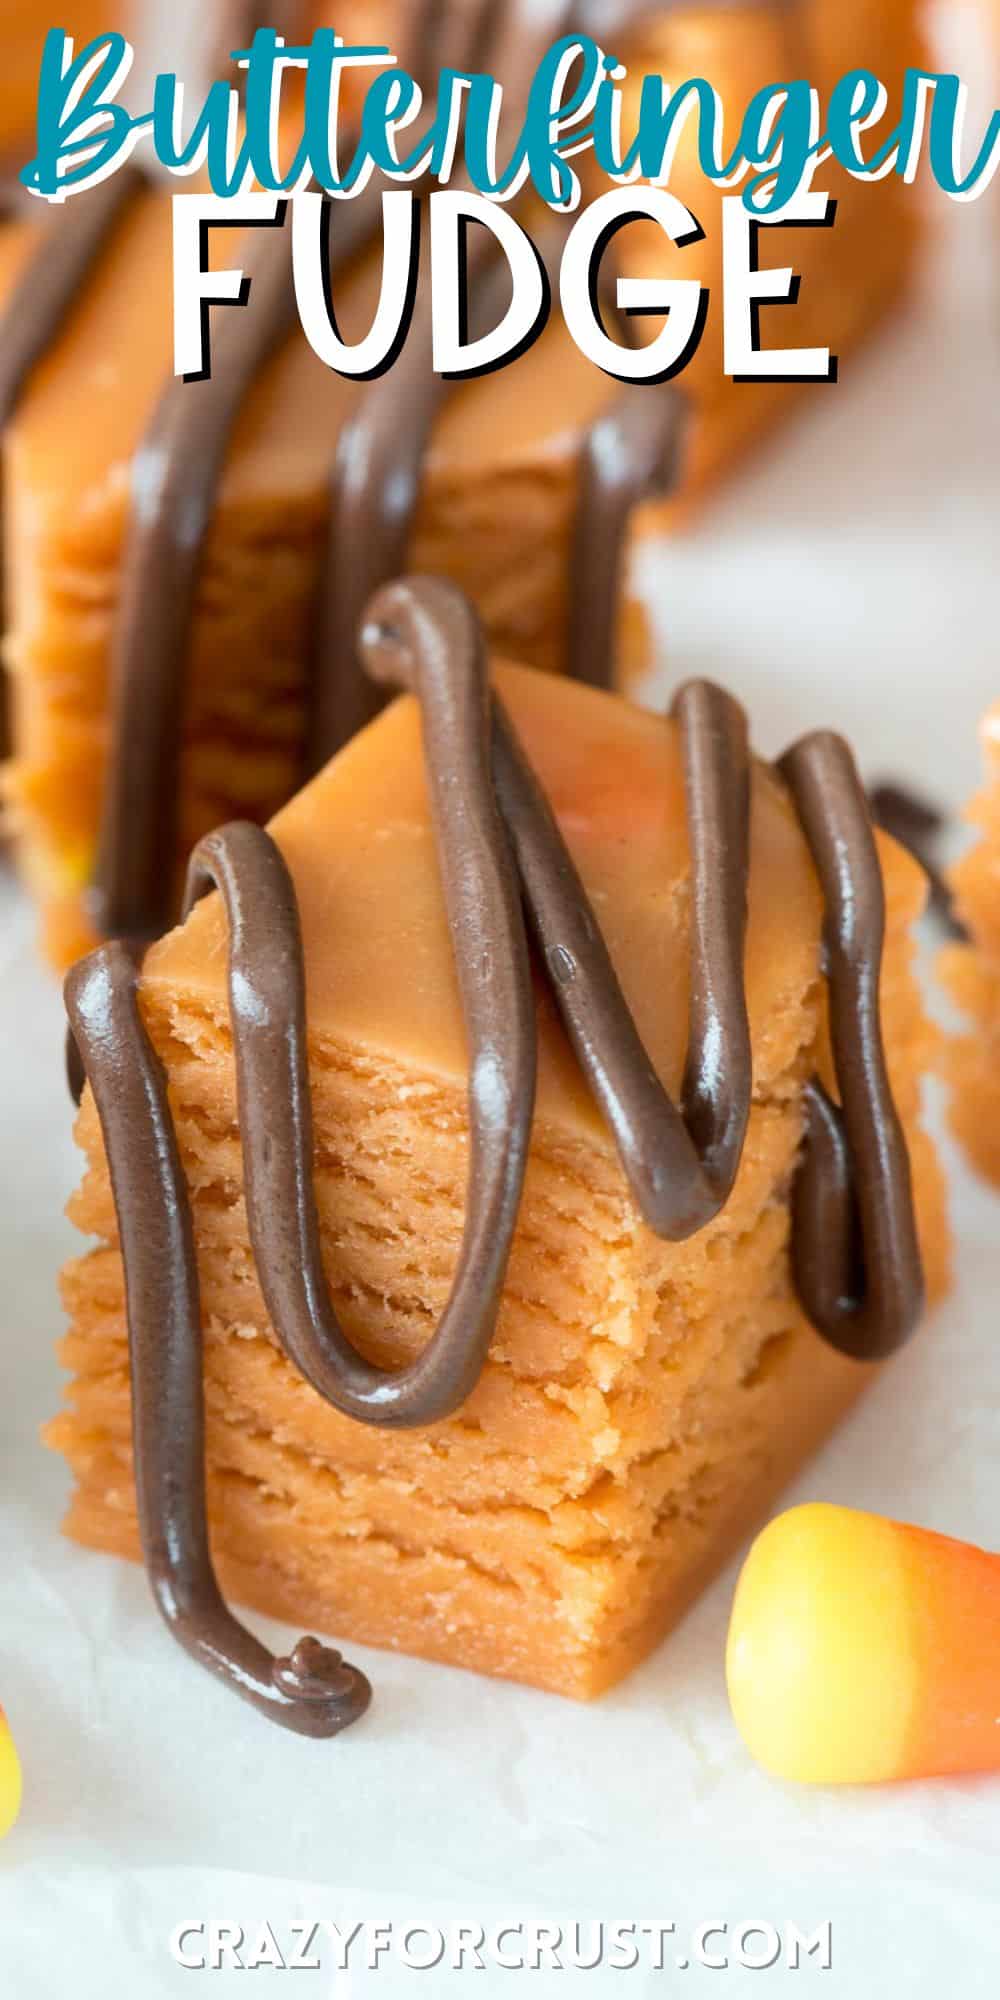 orange butterfinger fudge with chocolate sauce dripped over the top and words on the image.